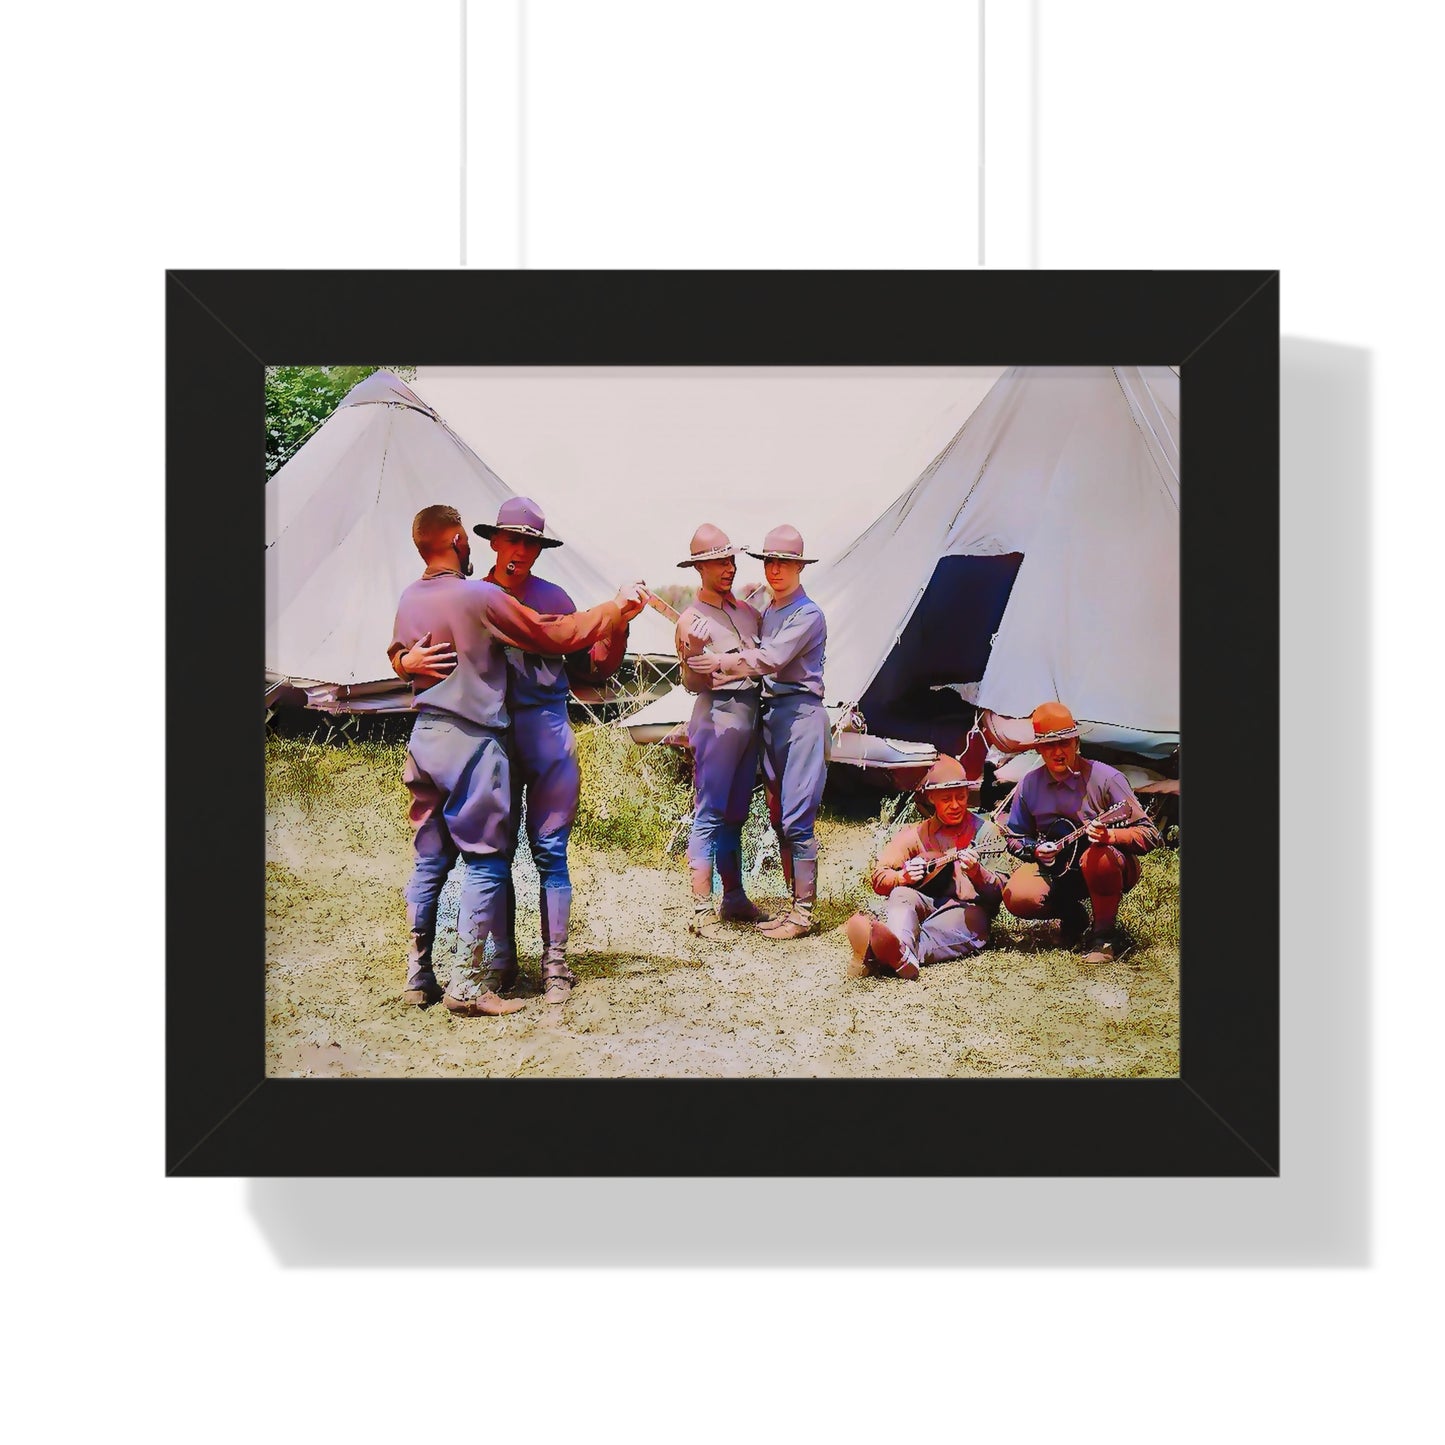 hommes 006 | Framed Poster Vintage USO WWII Camp Photo Dance Army Tent Gay Queer Gift Prideware LGBTQ